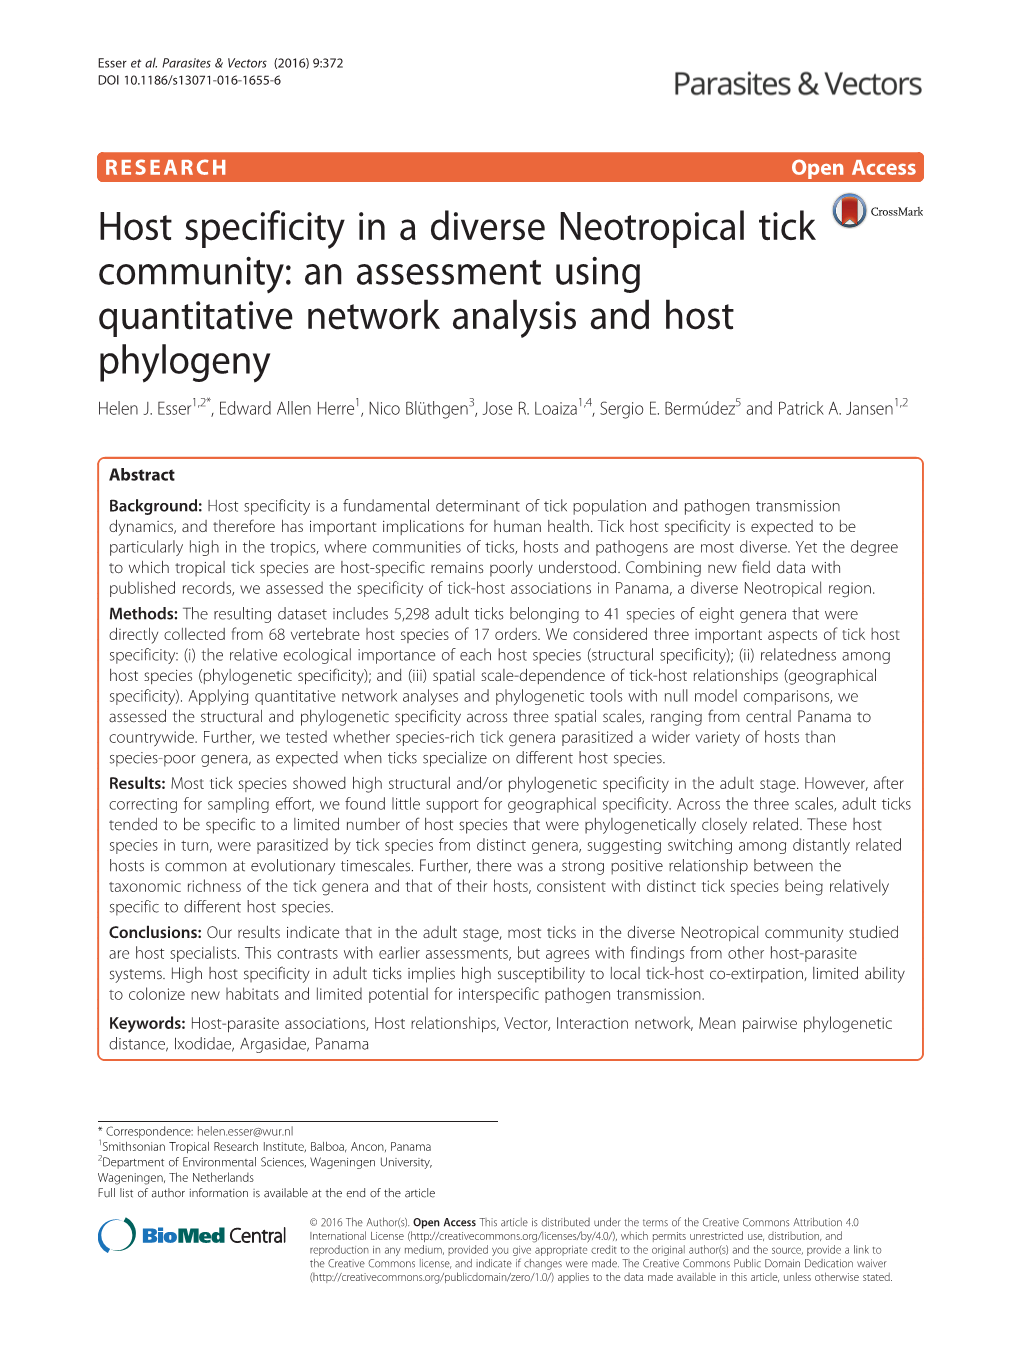 Host Specificity in a Diverse Neotropical Tick Community: an Assessment Using Quantitative Network Analysis and Host Phylogeny Helen J